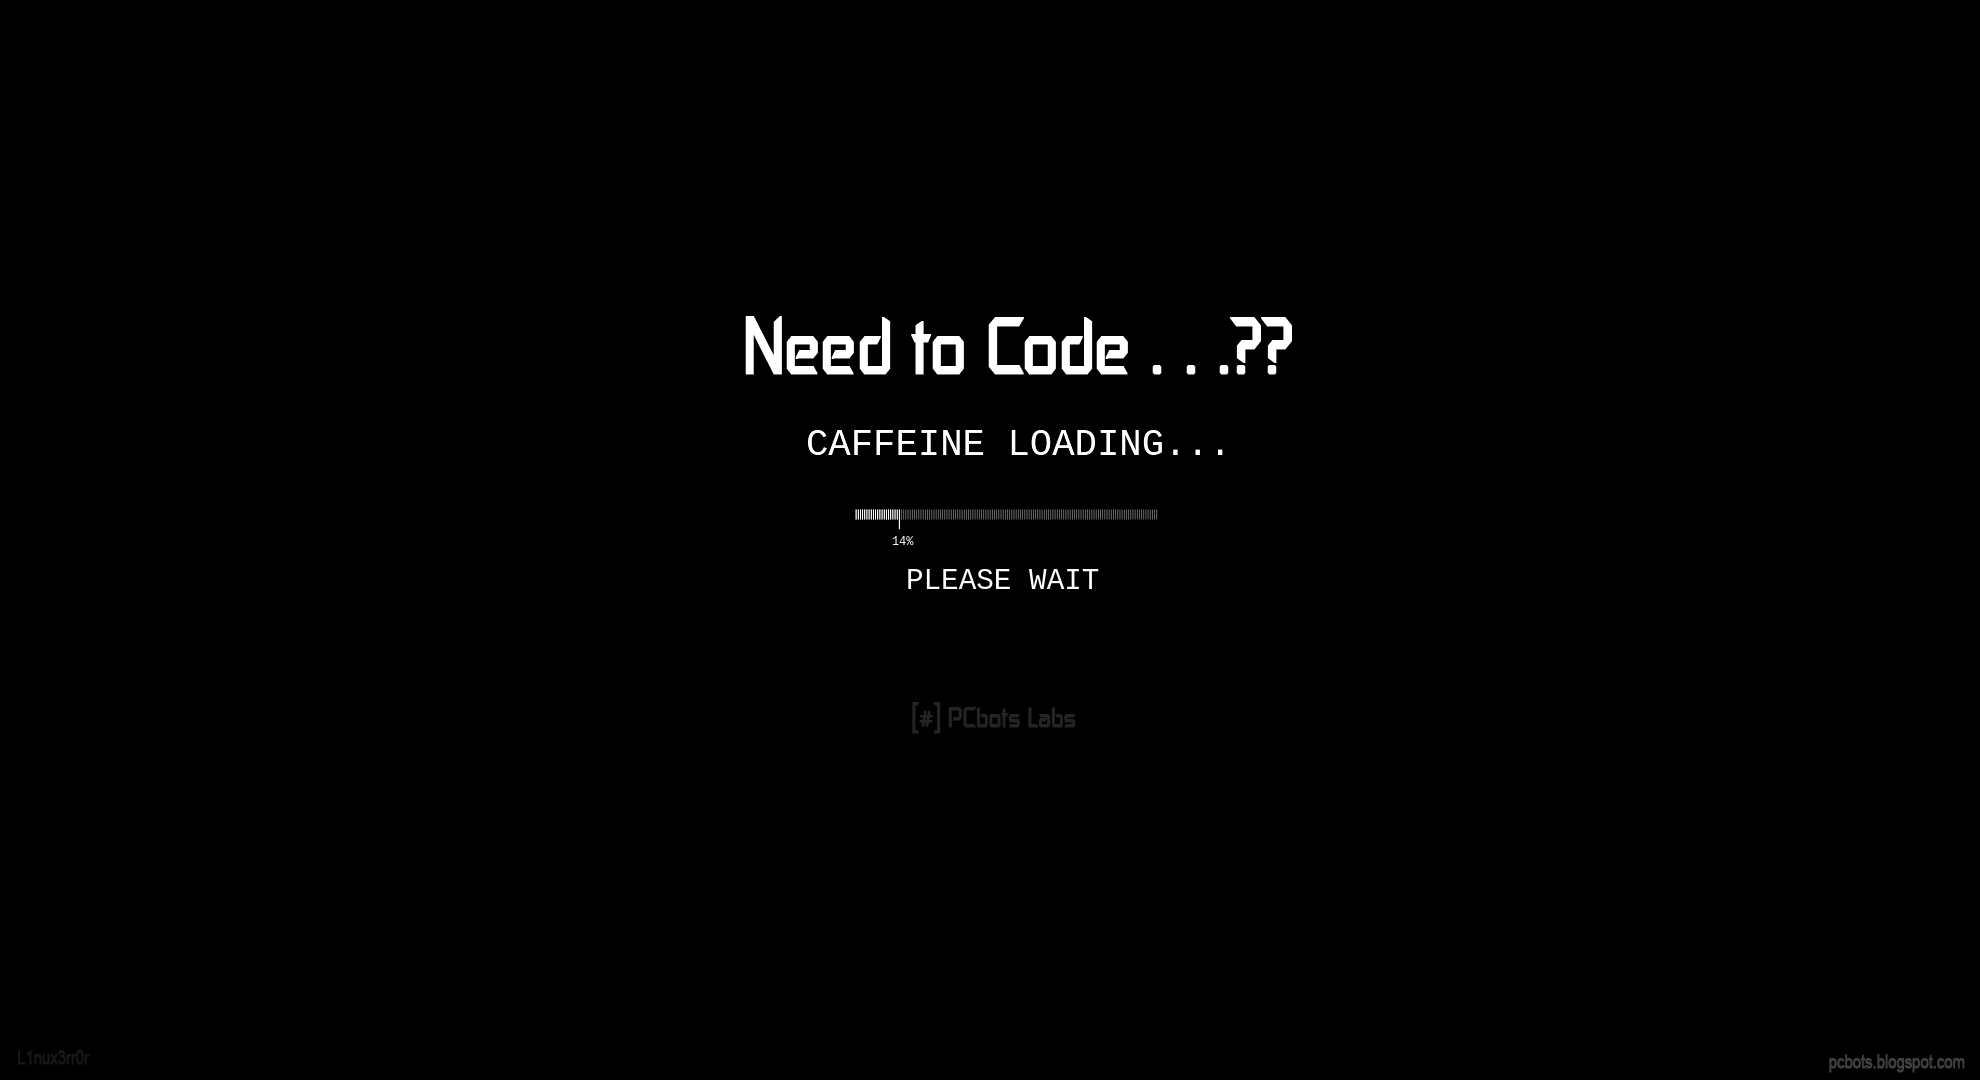 Need to Code ??? By PCbots